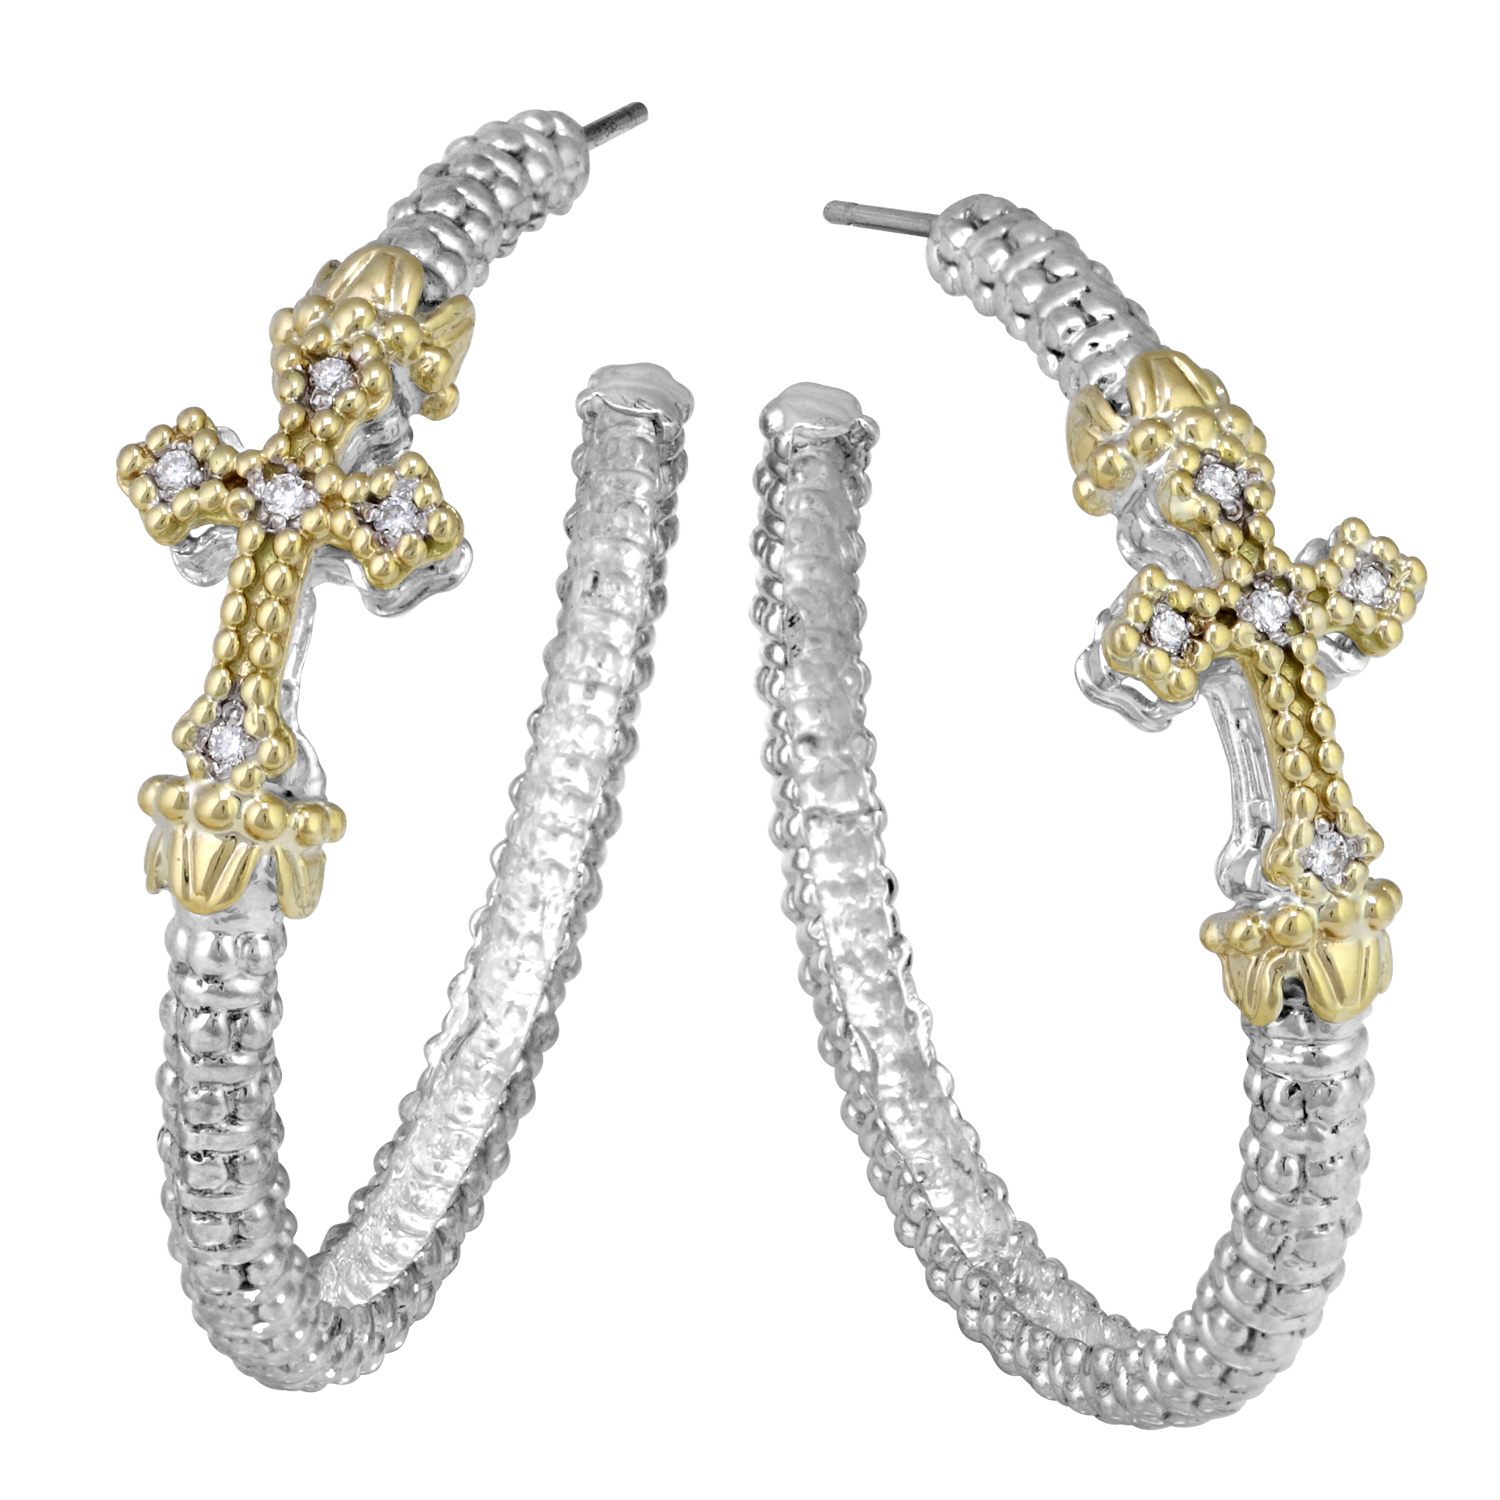 Vahan Cross Sterling Silver & Yellow Gold Diamond Earrings Galloway and Moseley, Inc. Sumter, SC